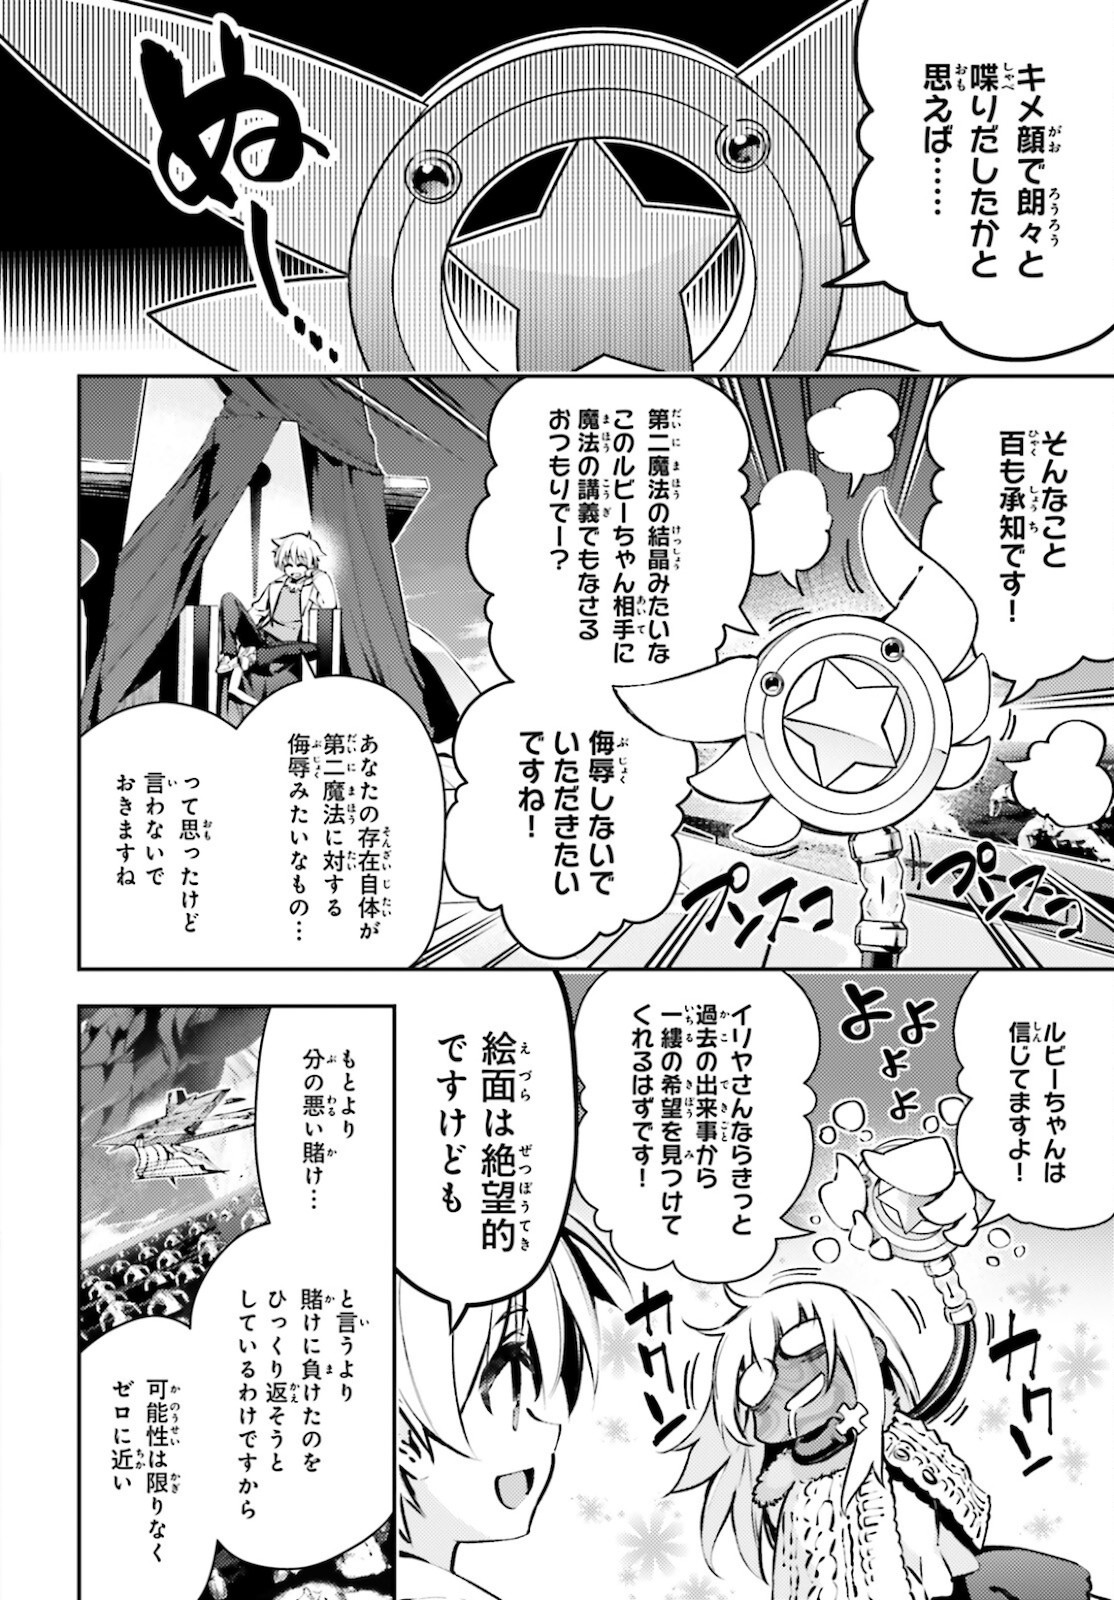 Fate/Kaleid Liner Prisma Illya Drei! - Chapter 66-1 - Page 2